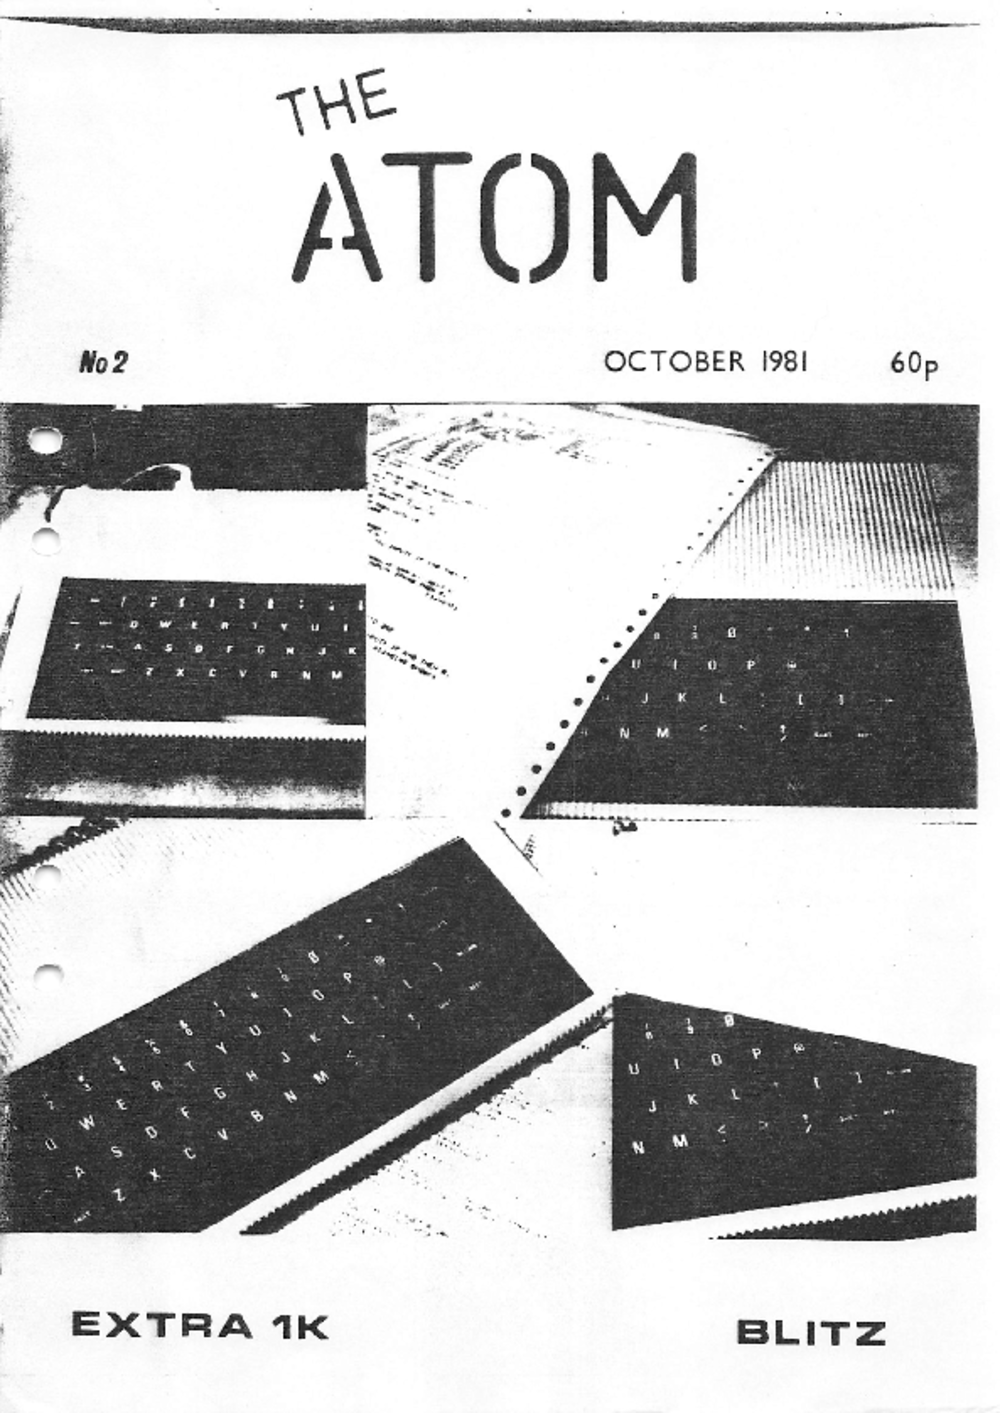 Article: The Atom - October 1981 - No 2